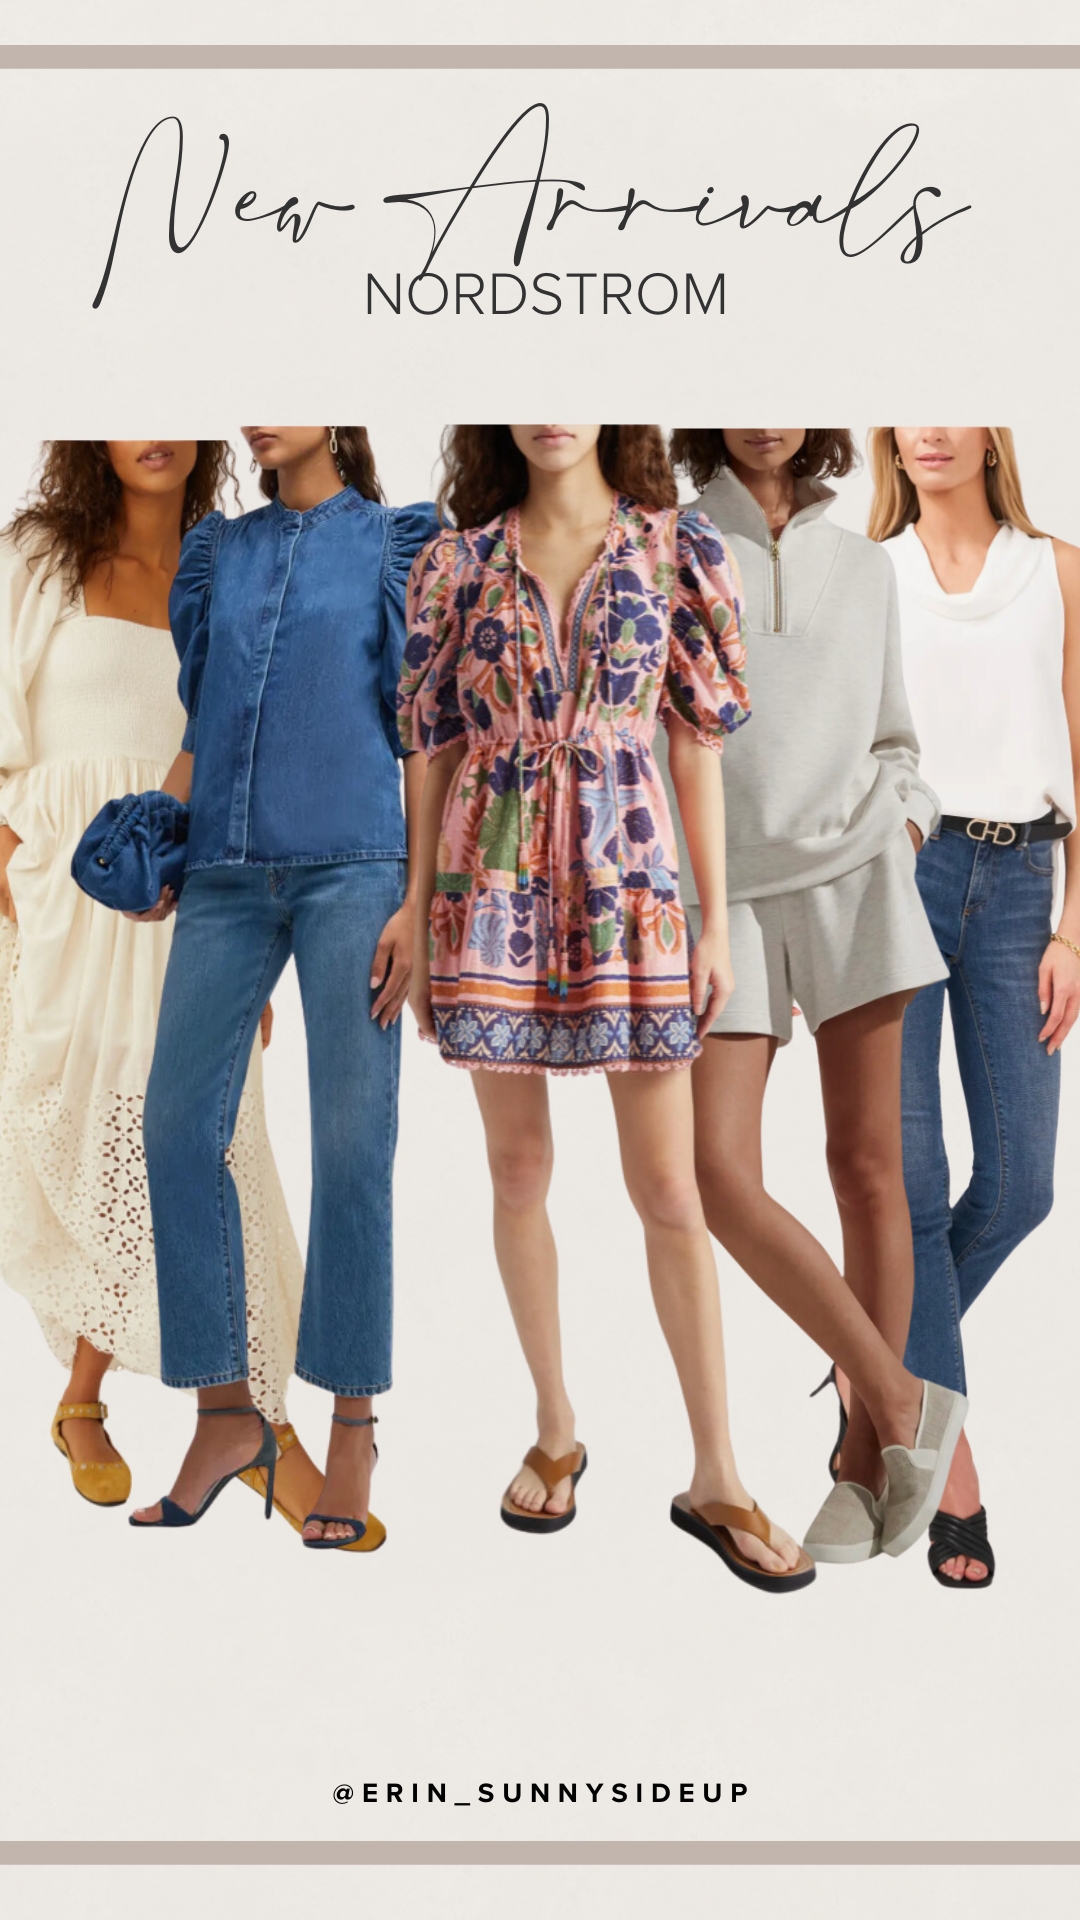 New Fashion Arrivals from Nordstrom